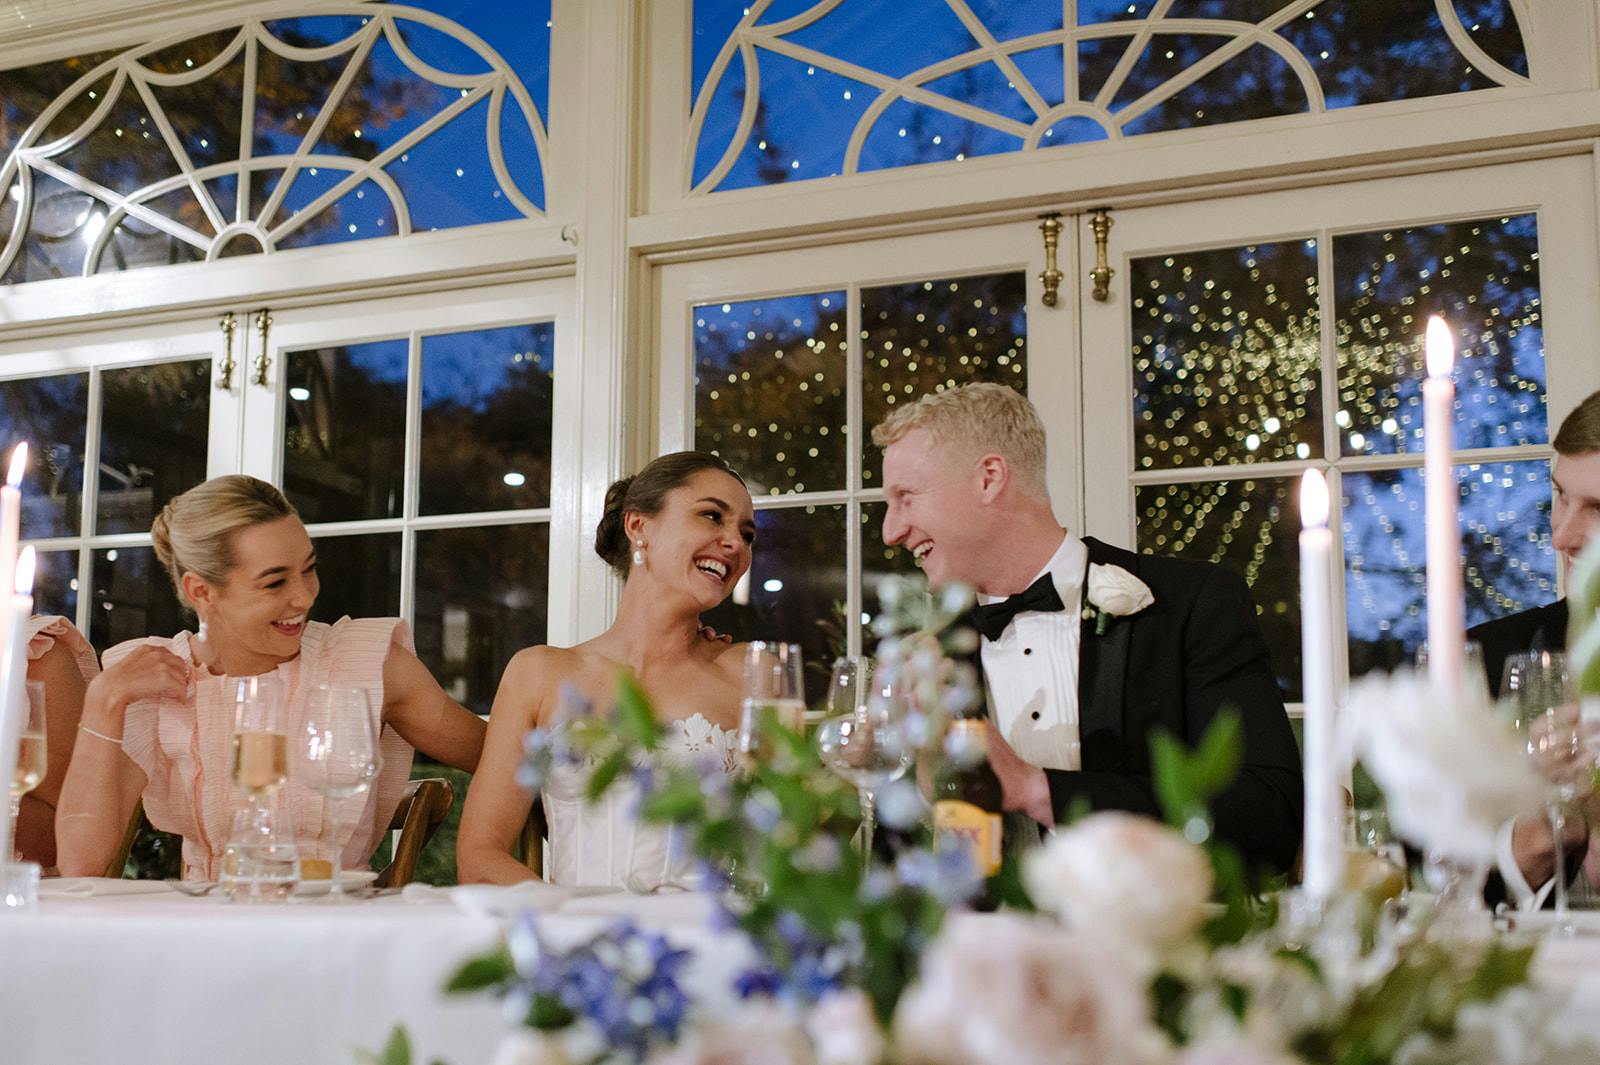 A bride and groom, dressed in formal wedding attire, sit at a beautifully decorated table laughing and engaging with bridesmaids and guests. The background features large windows with an evening view and twinkling lights. The scene is joyful and elegant.